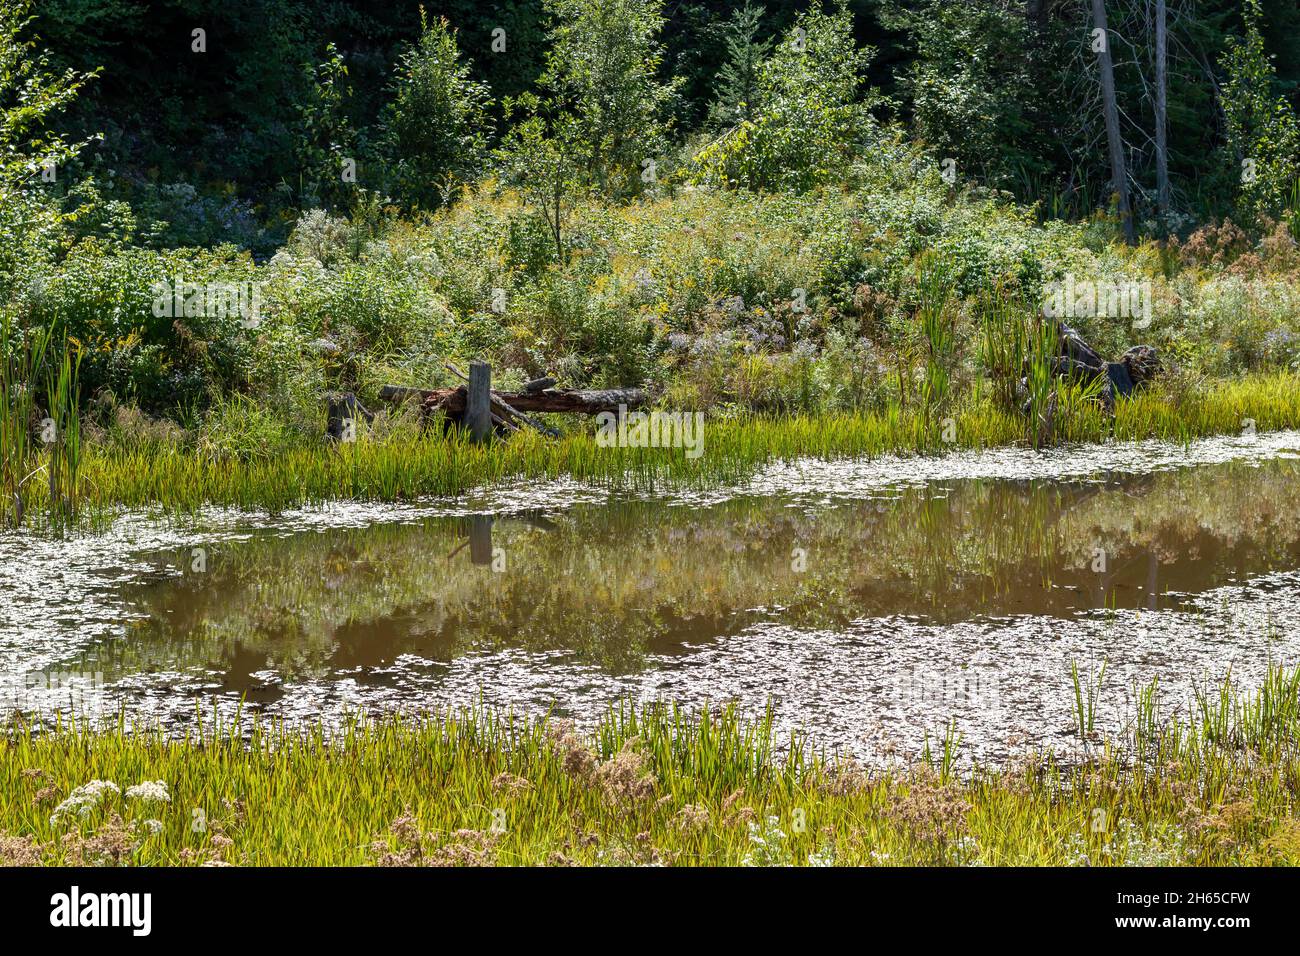 Small farm pond with vegetation growth at its edges. Trees in background. Stock Photo